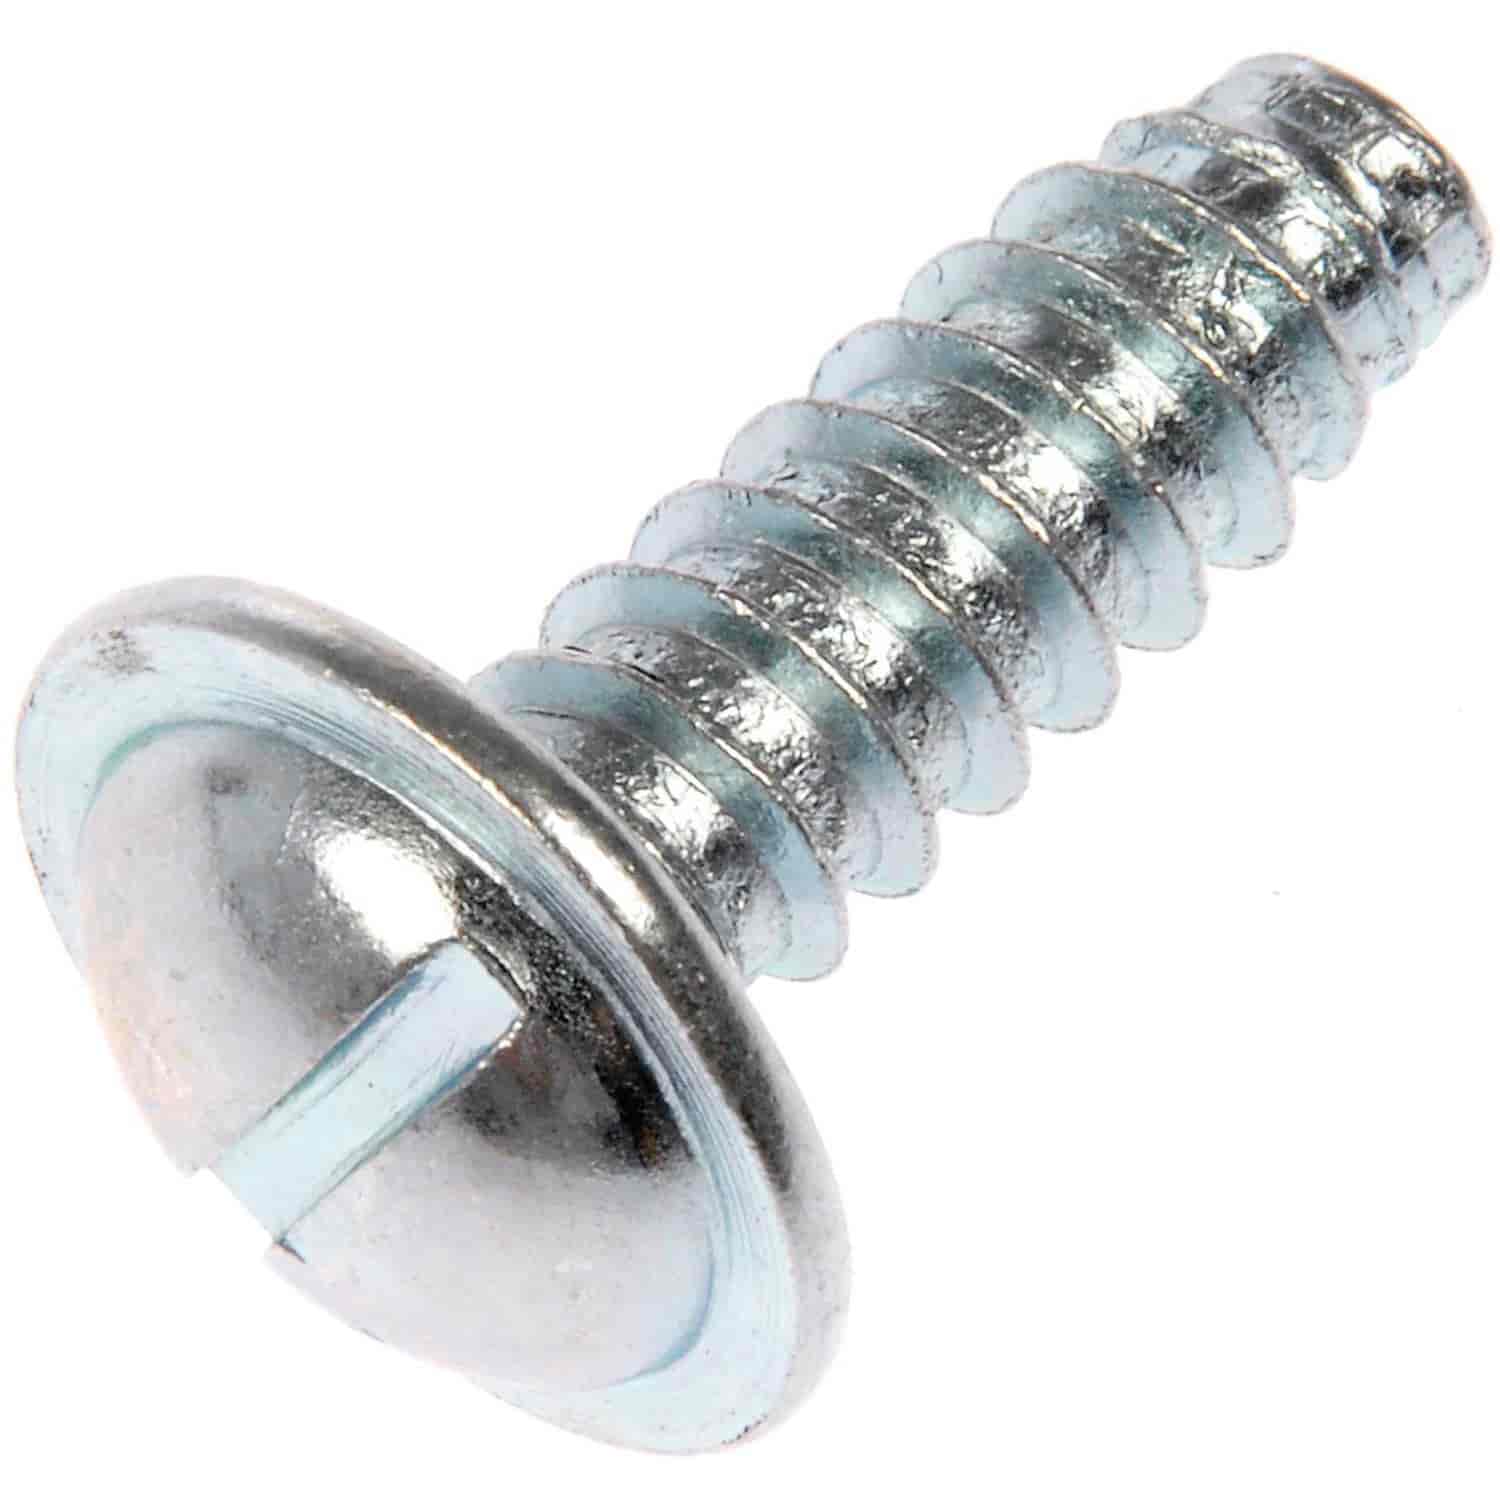 License Plate Fasteners-1/4 In. No. 14 x 3/4 In.